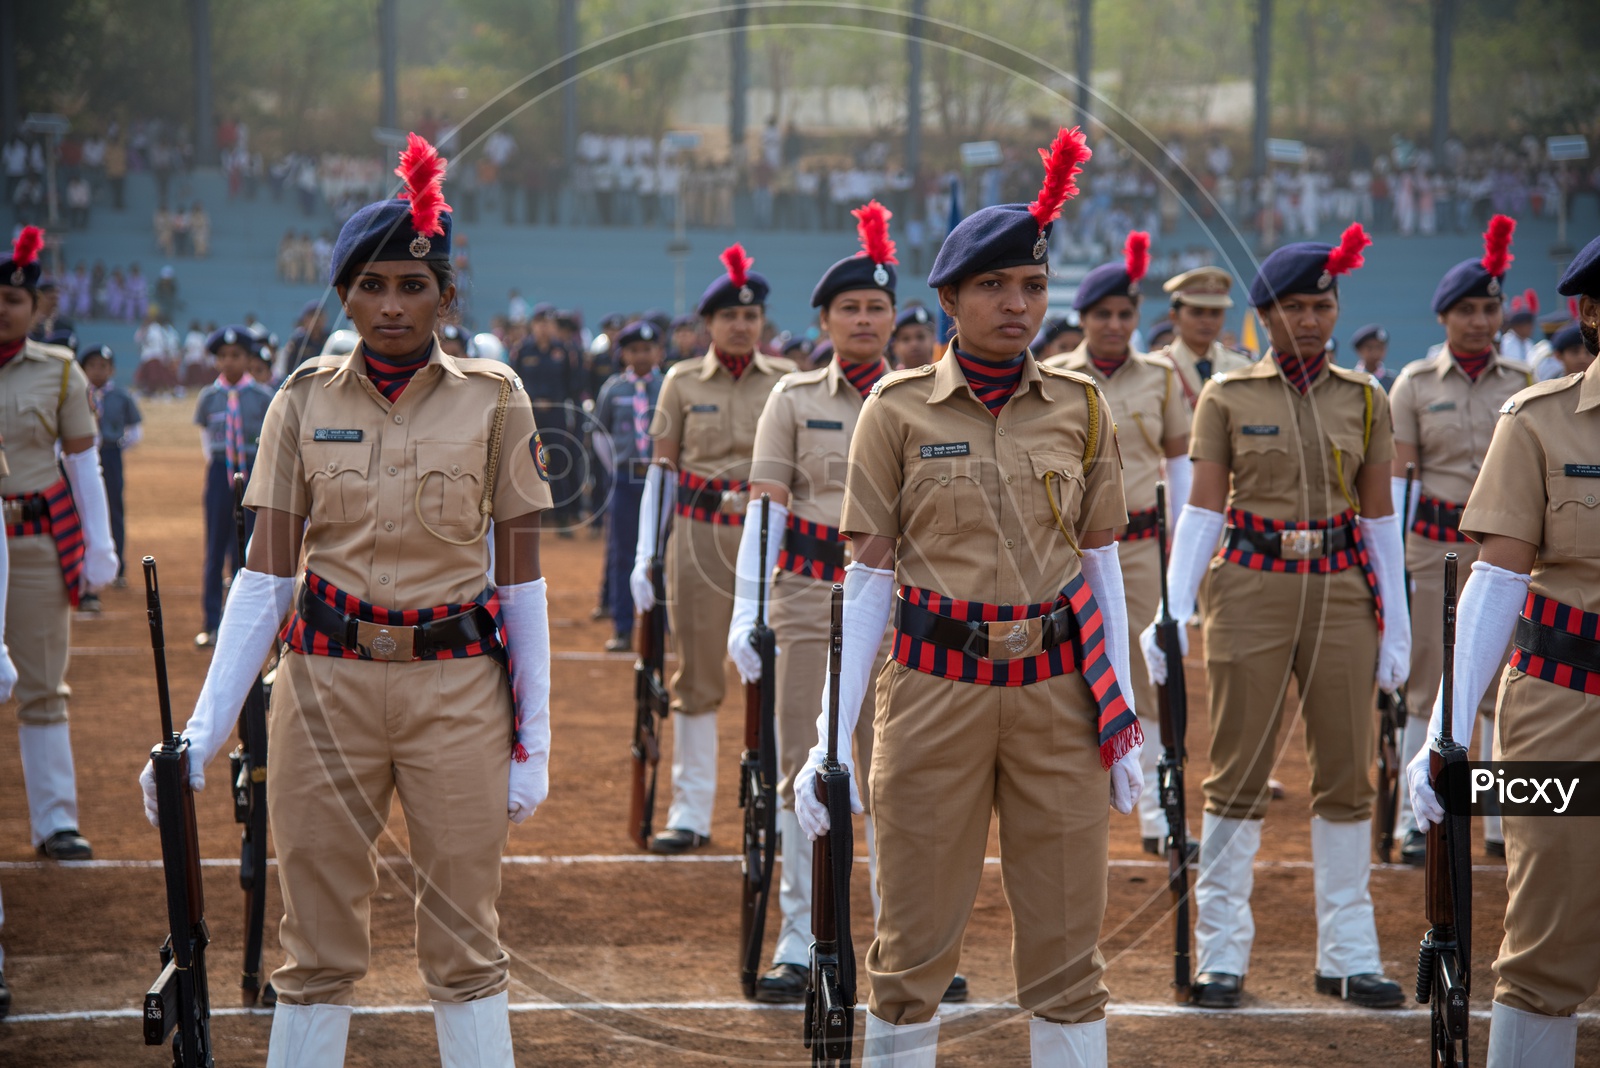 Maharashtra Cadet Woman  Police  in  Independence Day  Parade